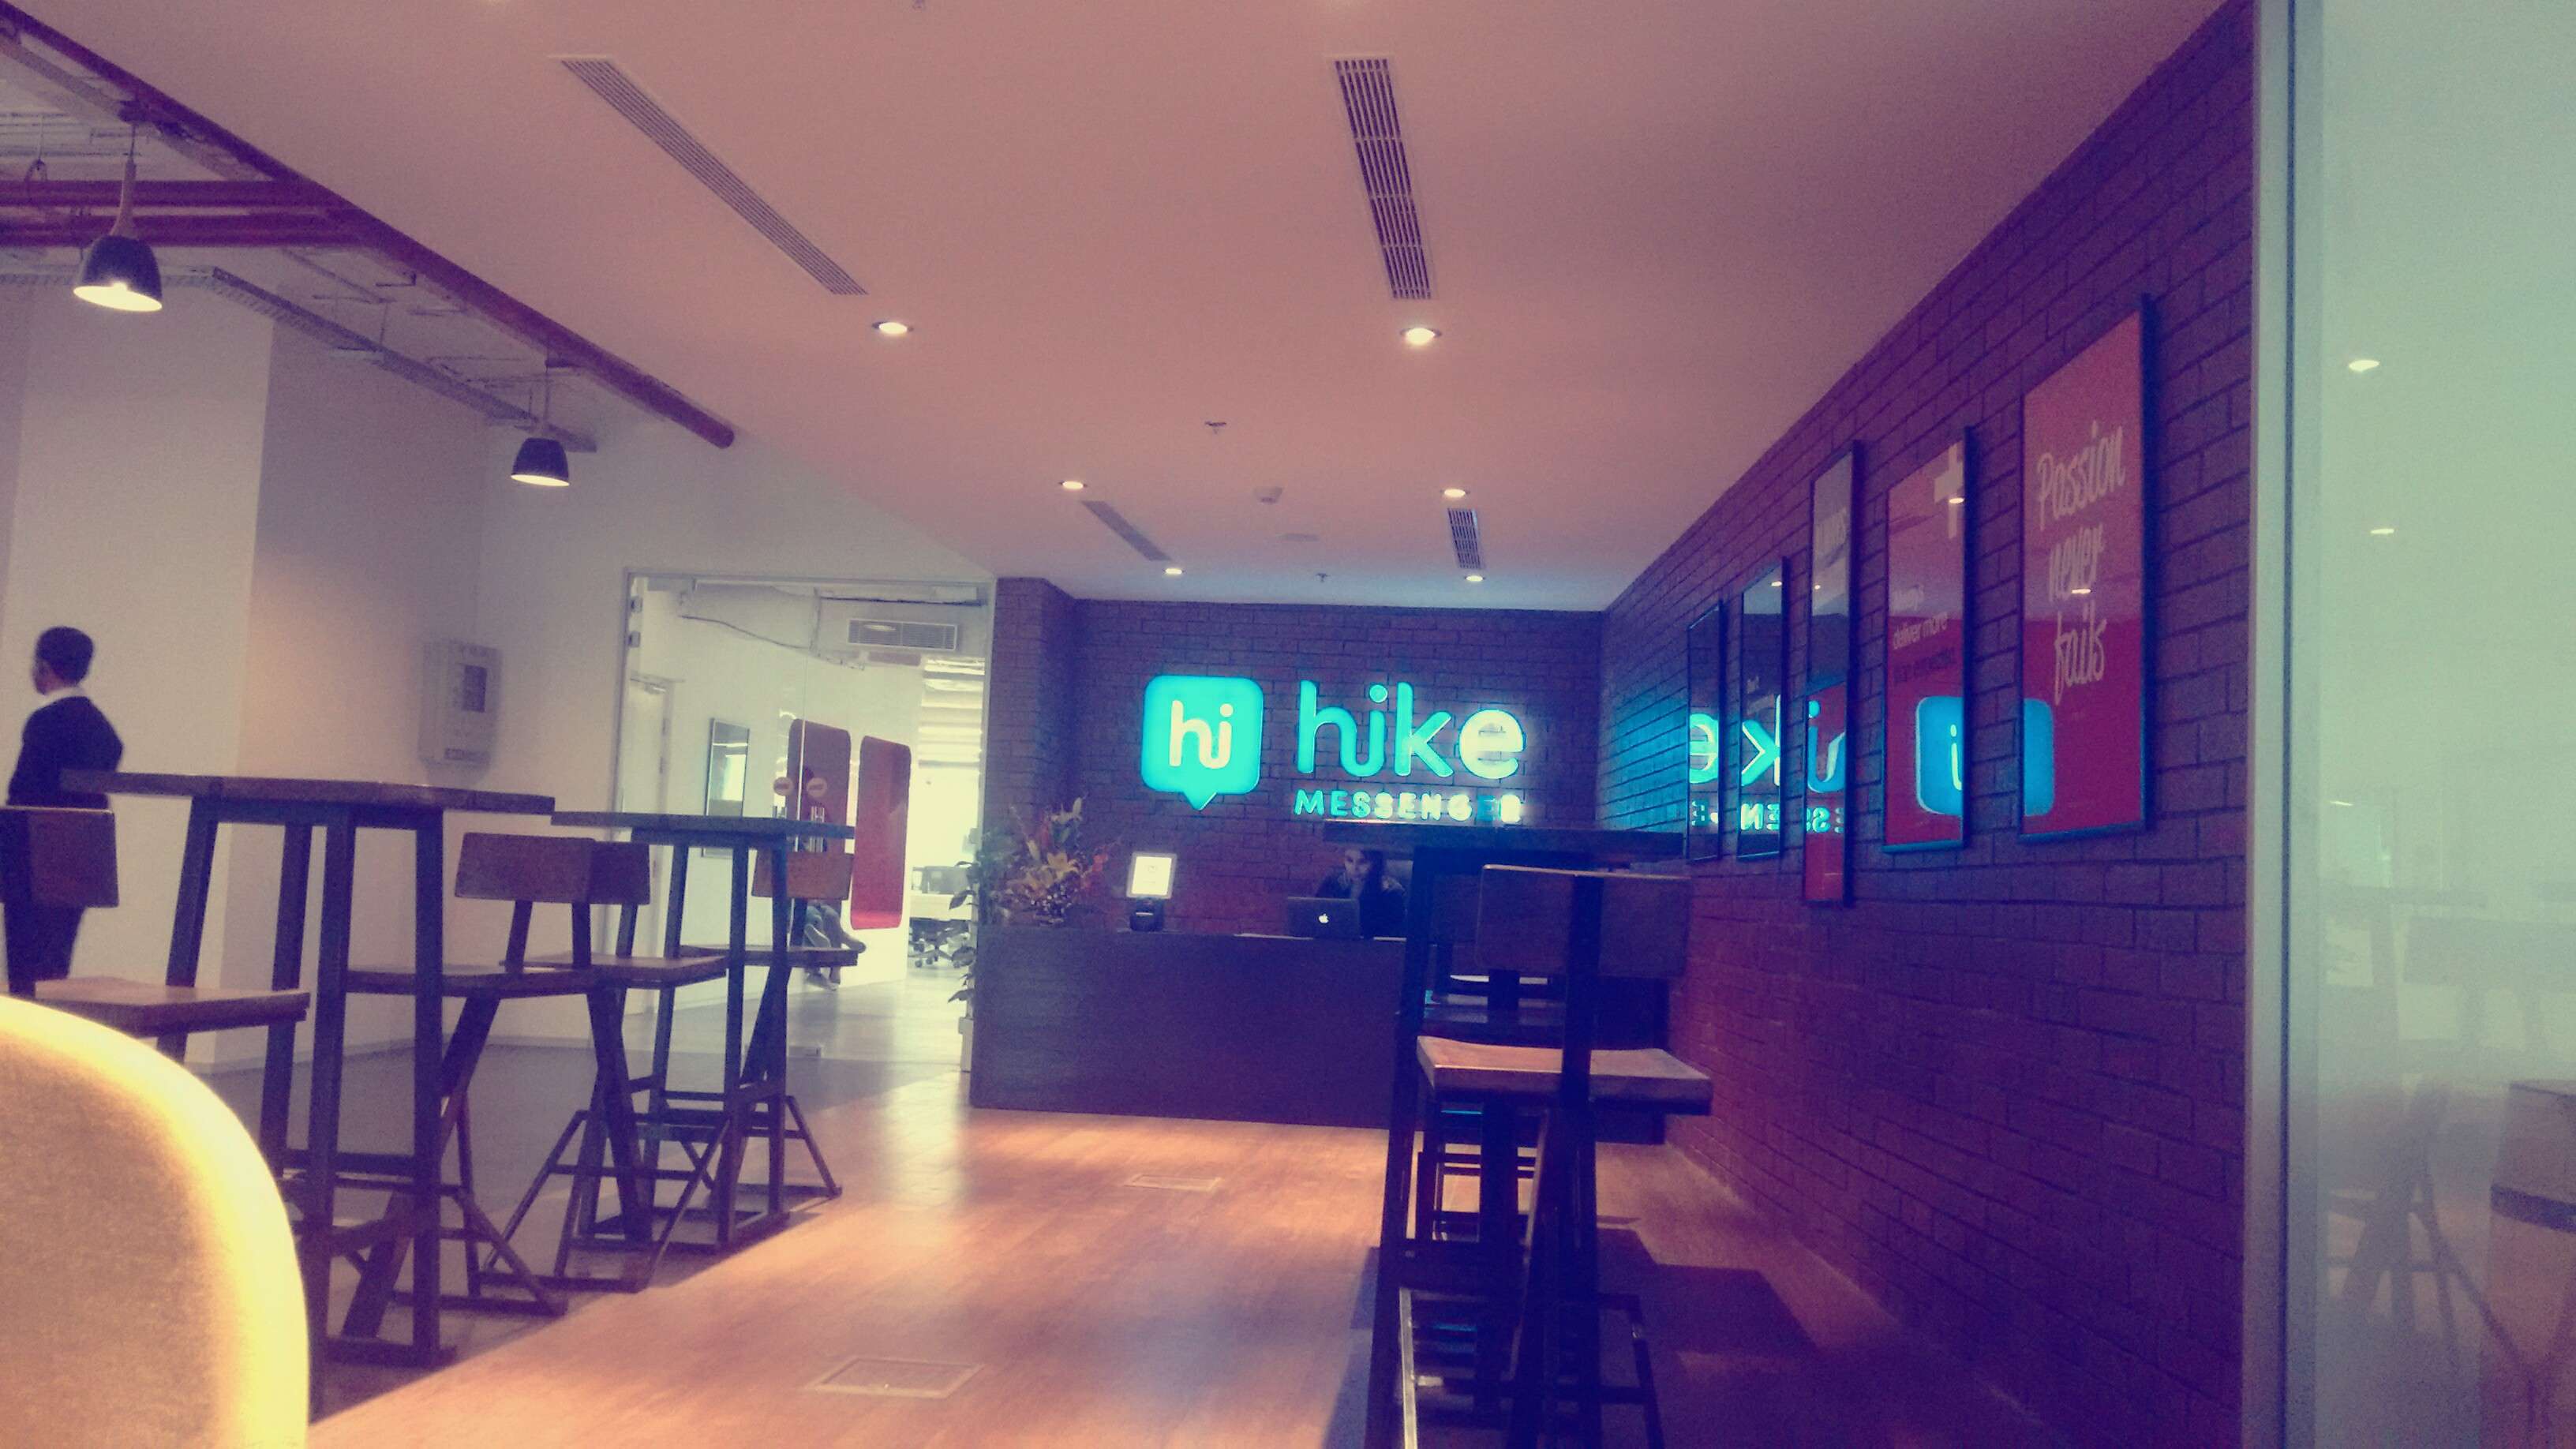 In pictures: I spent two hours at Hike's new office and I wish I could go  back again! | Business Insider India